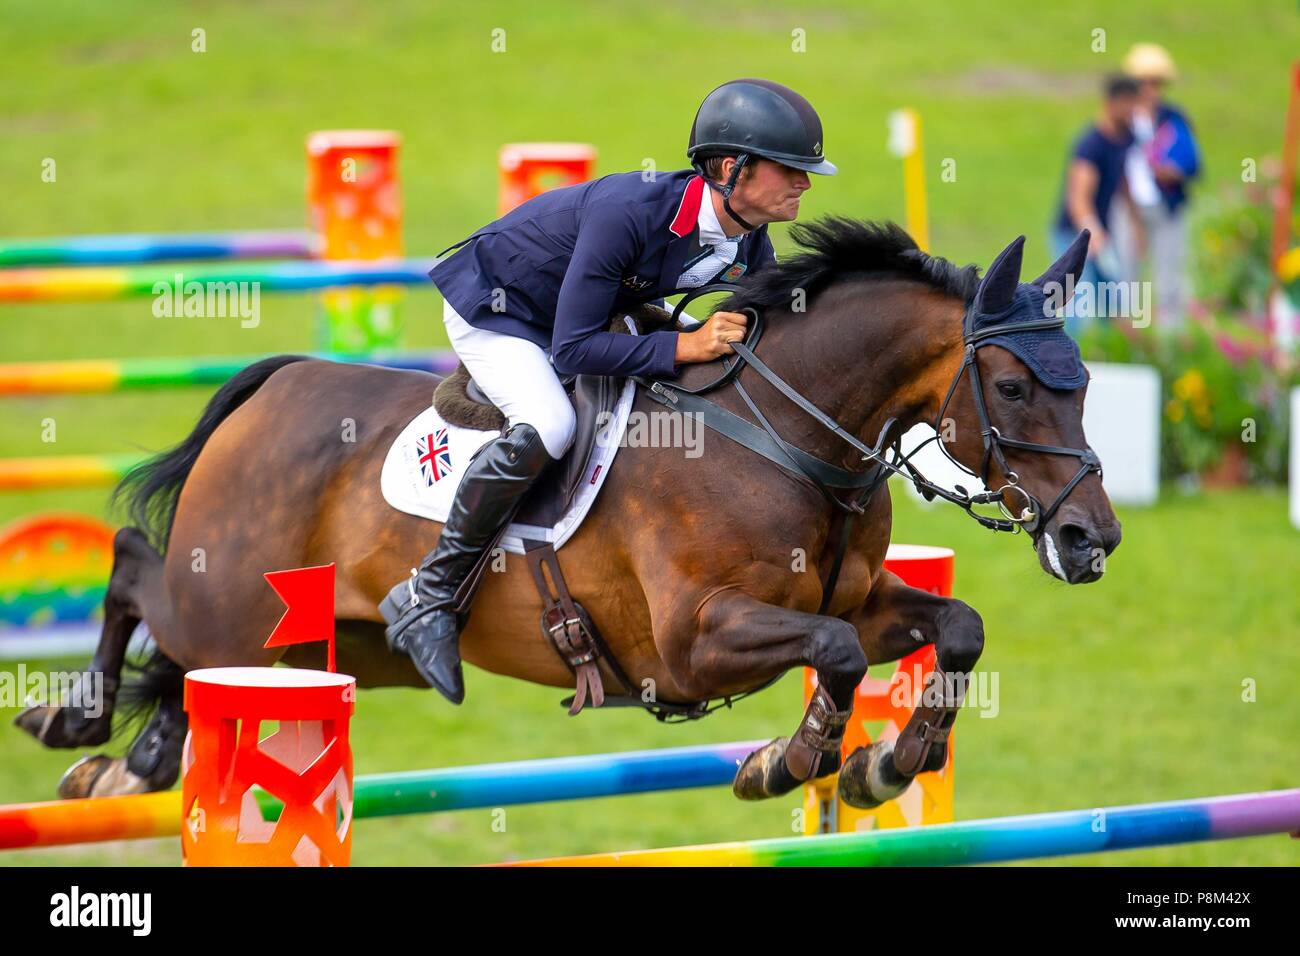 Fontainebleu, France. 12th July, 2018. William Fletcher riding Persimmon. GBR. 2nd competition. Young Riders. 1.50m. Longines FEI European YR J CH Championship. Showjumping. Le Grand Parquet. Fontainebleu. France. 12/07/2018. Credit: Sport In Pictures/Alamy Live News Stock Photo